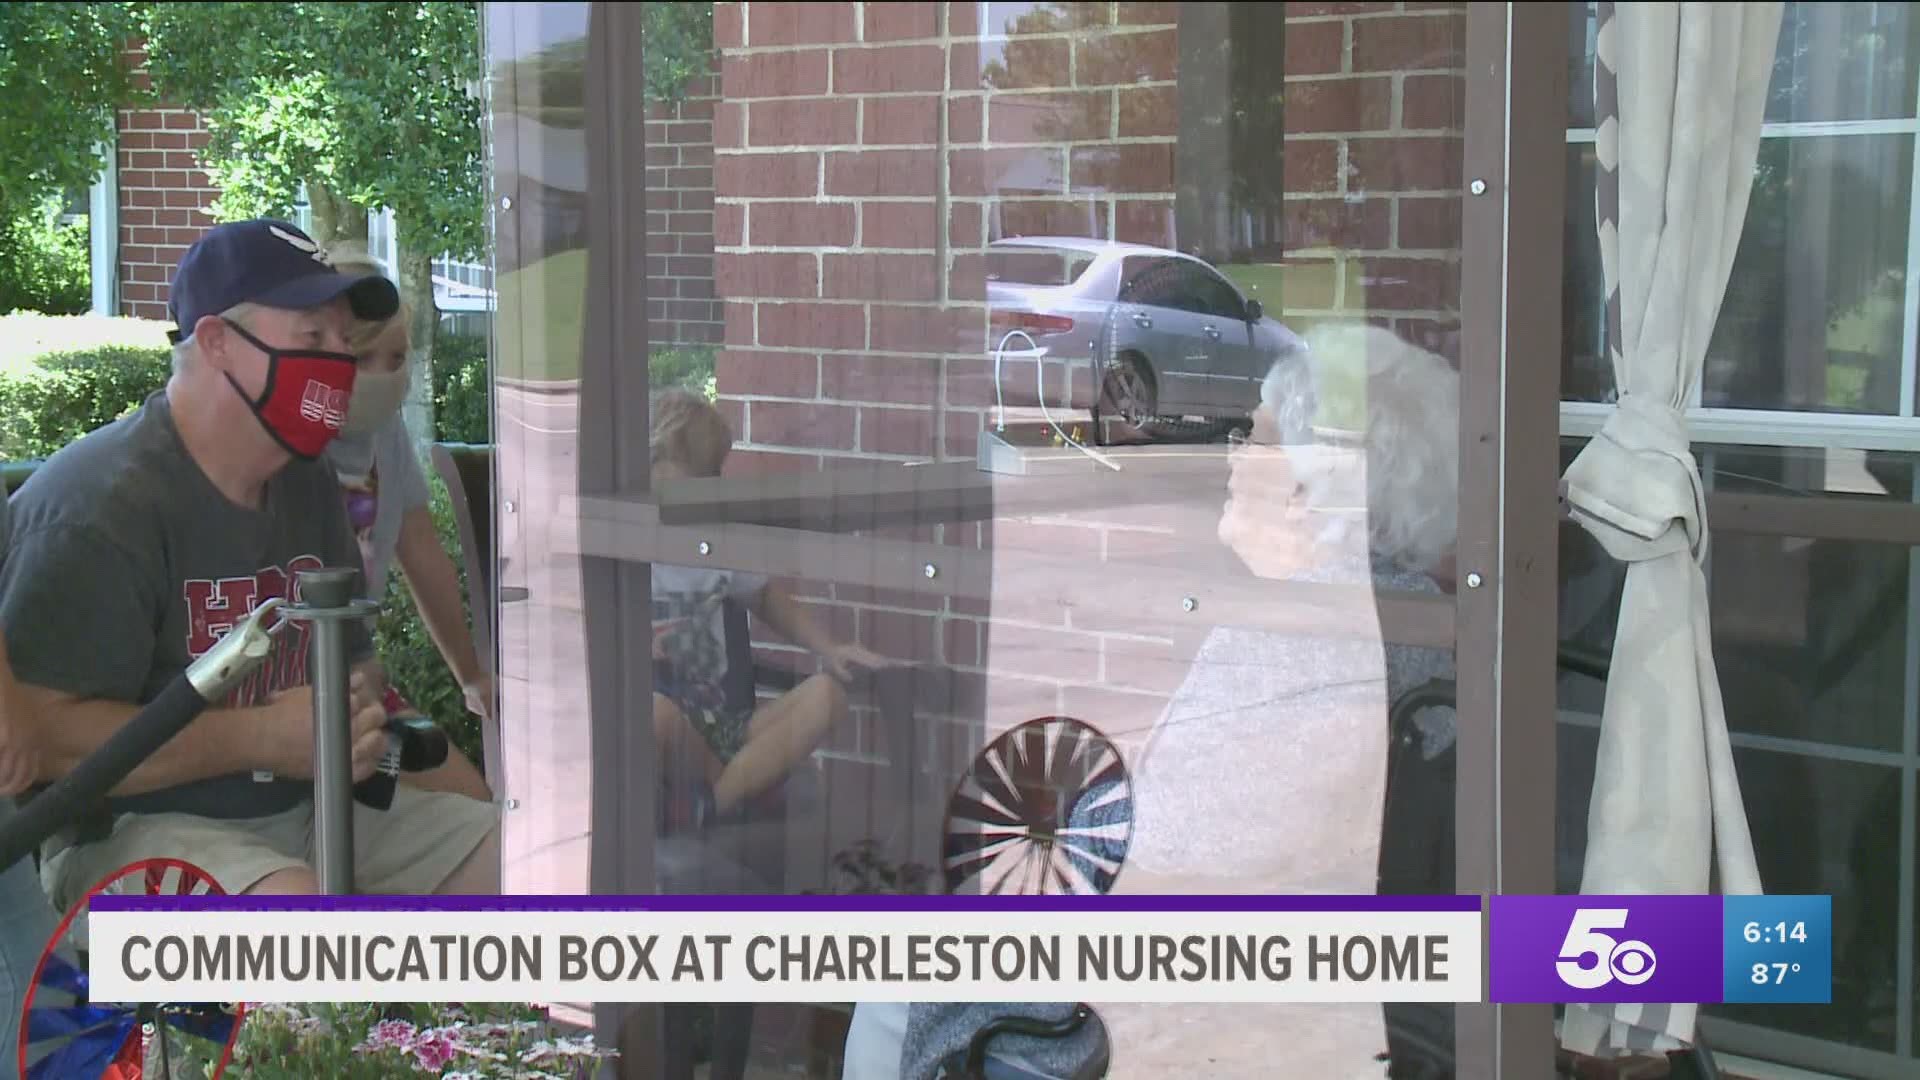 Greenhurst Nursing Center, in Charleston, designed and made new visitation stations to give their patients the chance to safely visit loved ones. https://bit.ly/3dXm